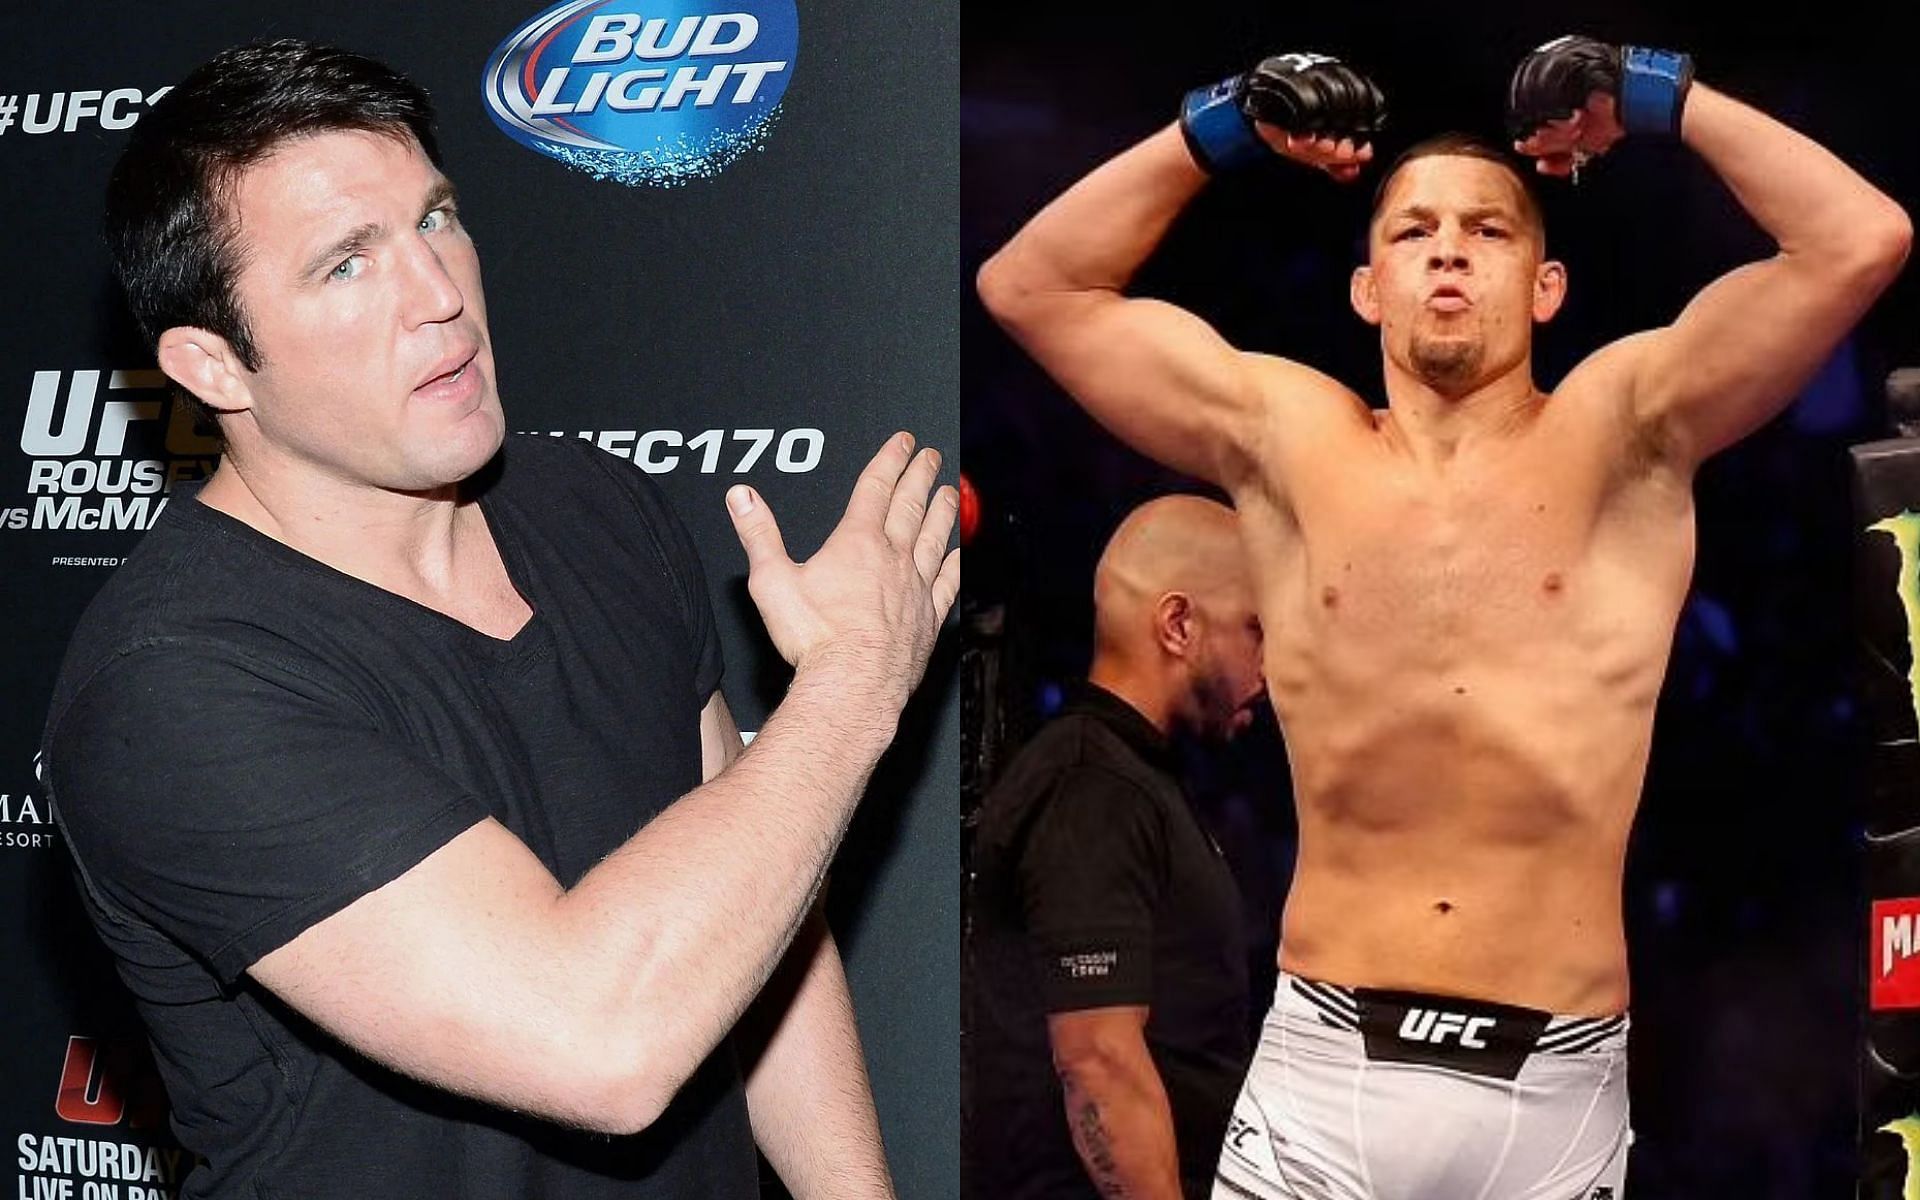 Chael Sonnen (left) and Nate Diaz (right)